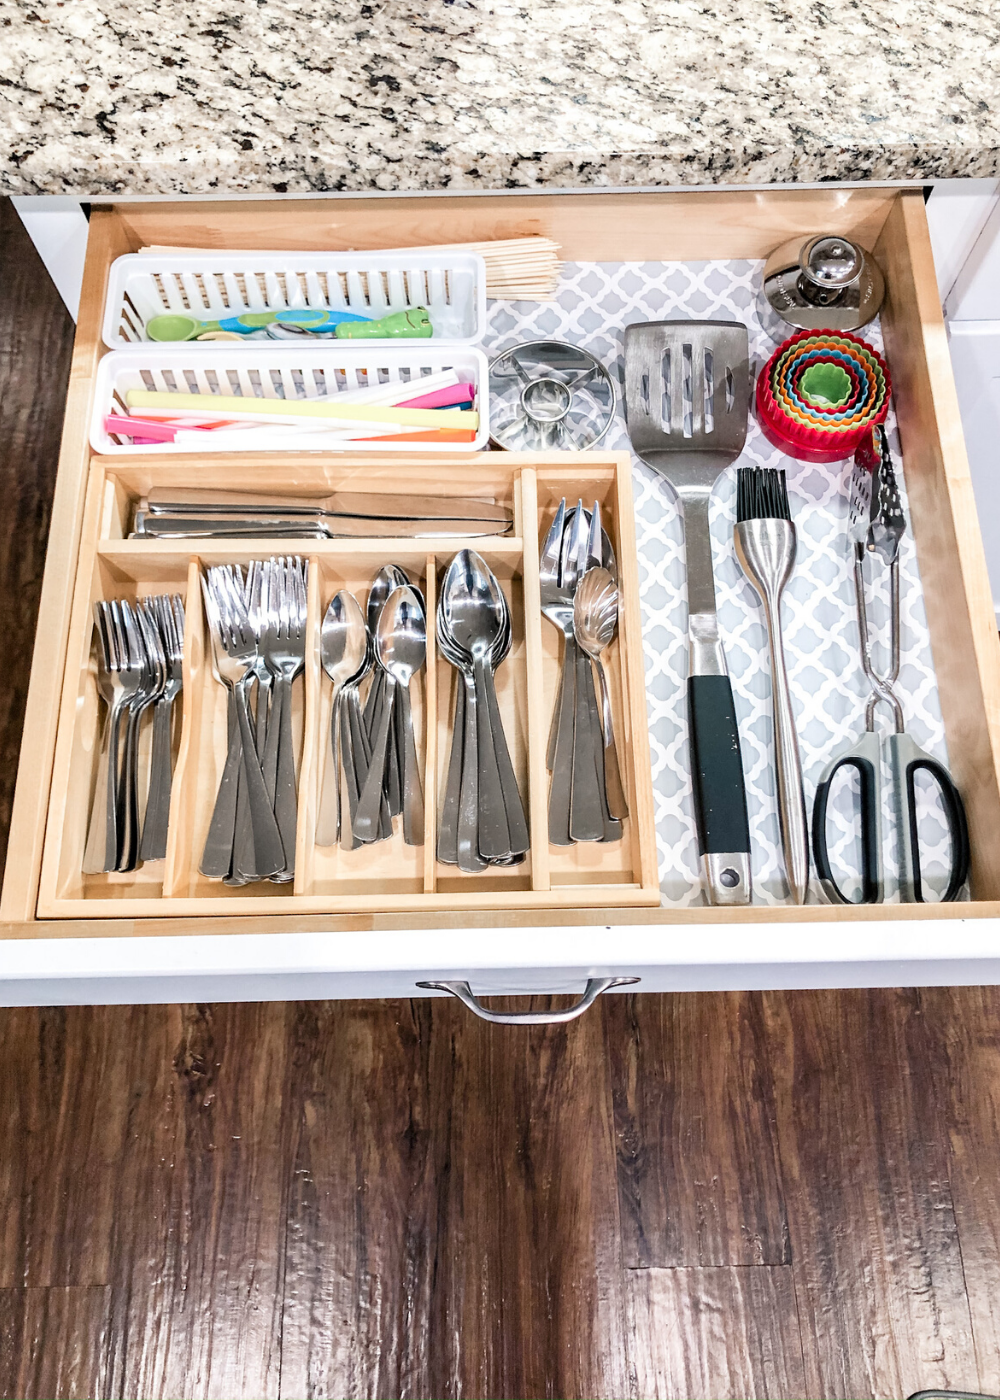 Organized Kitchen - Silverware And Grilling Tools